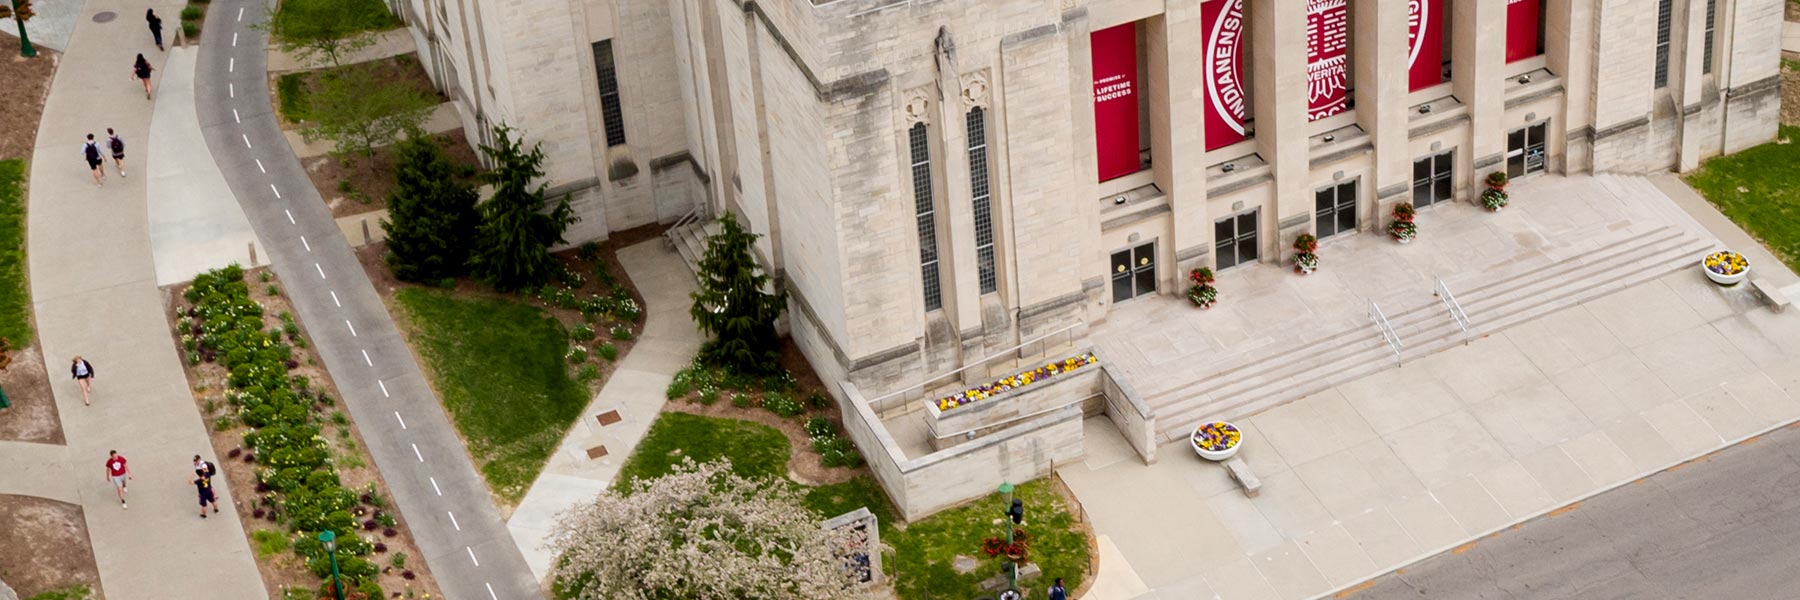 The IU Auditorium entrance seen from above, showing the stairs and accessible ramp.